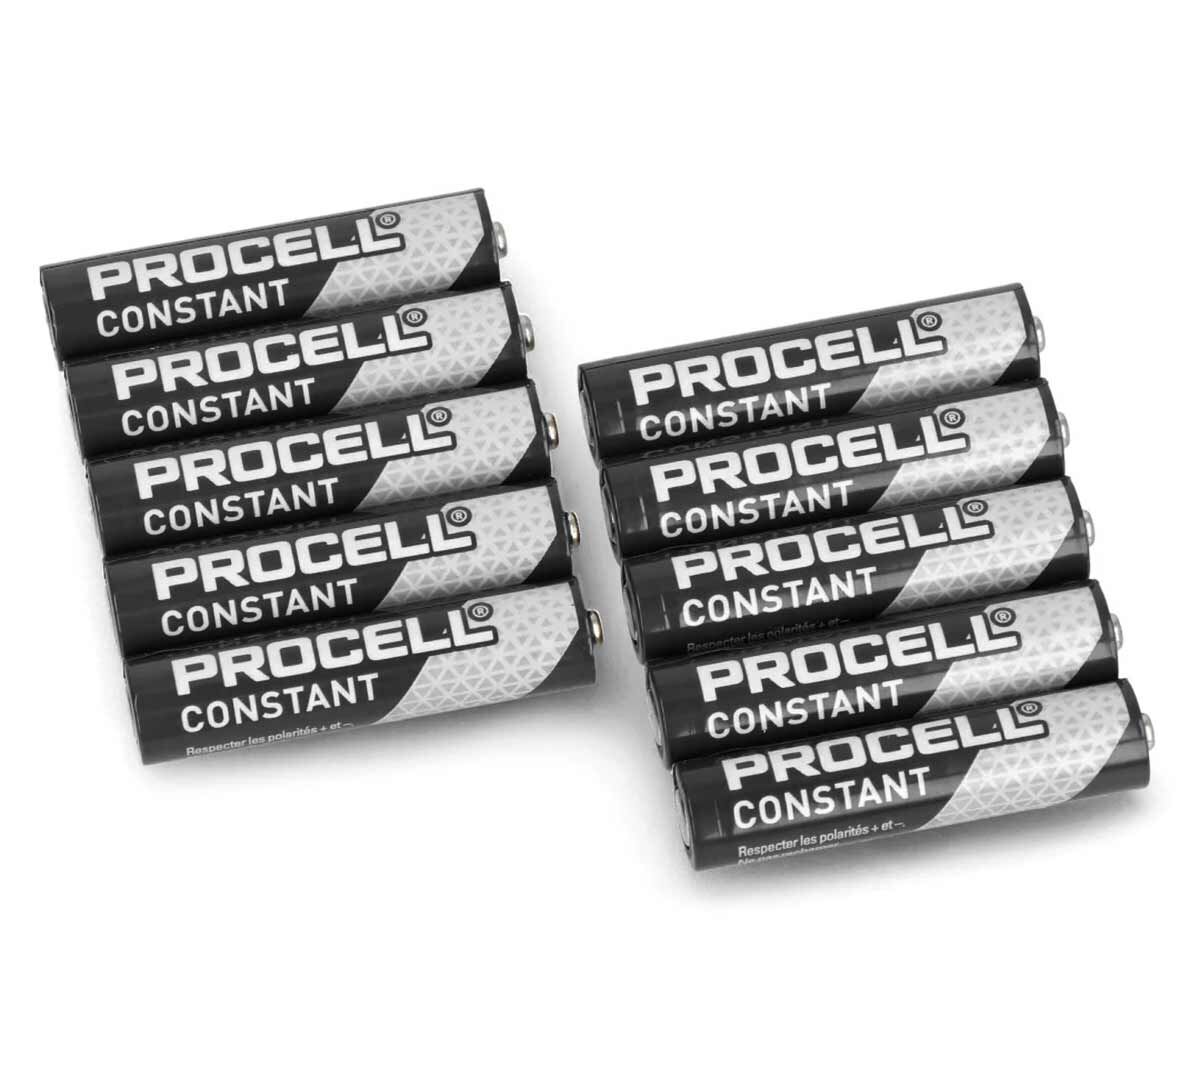 Элемент питания LR 03 Duracell Procell CONSTANT 1.5V Box10 1